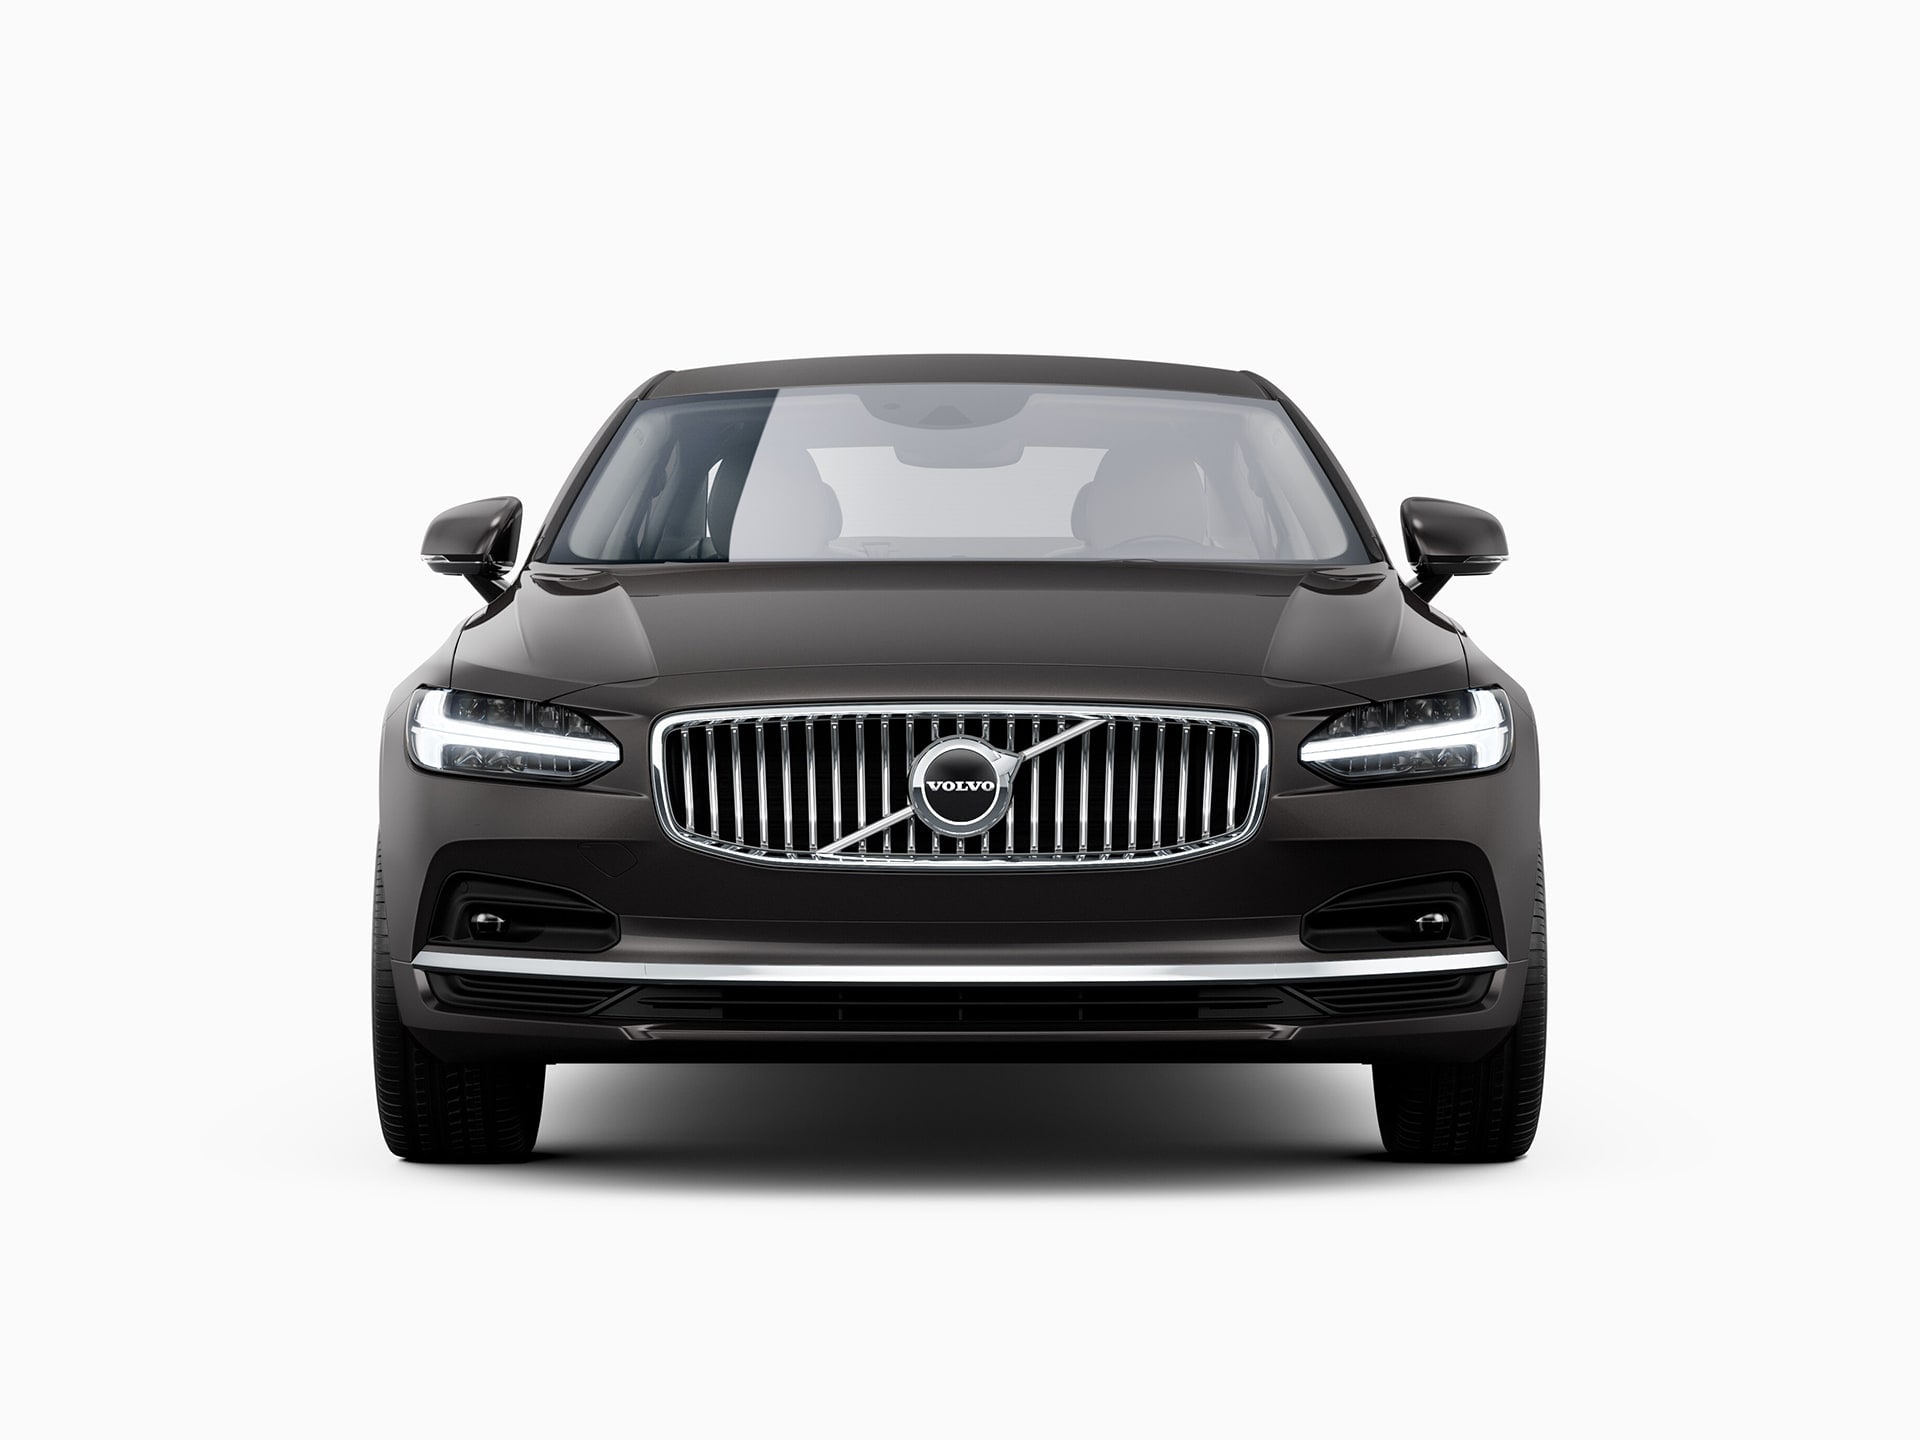 The front of a Volvo S90 sedan.